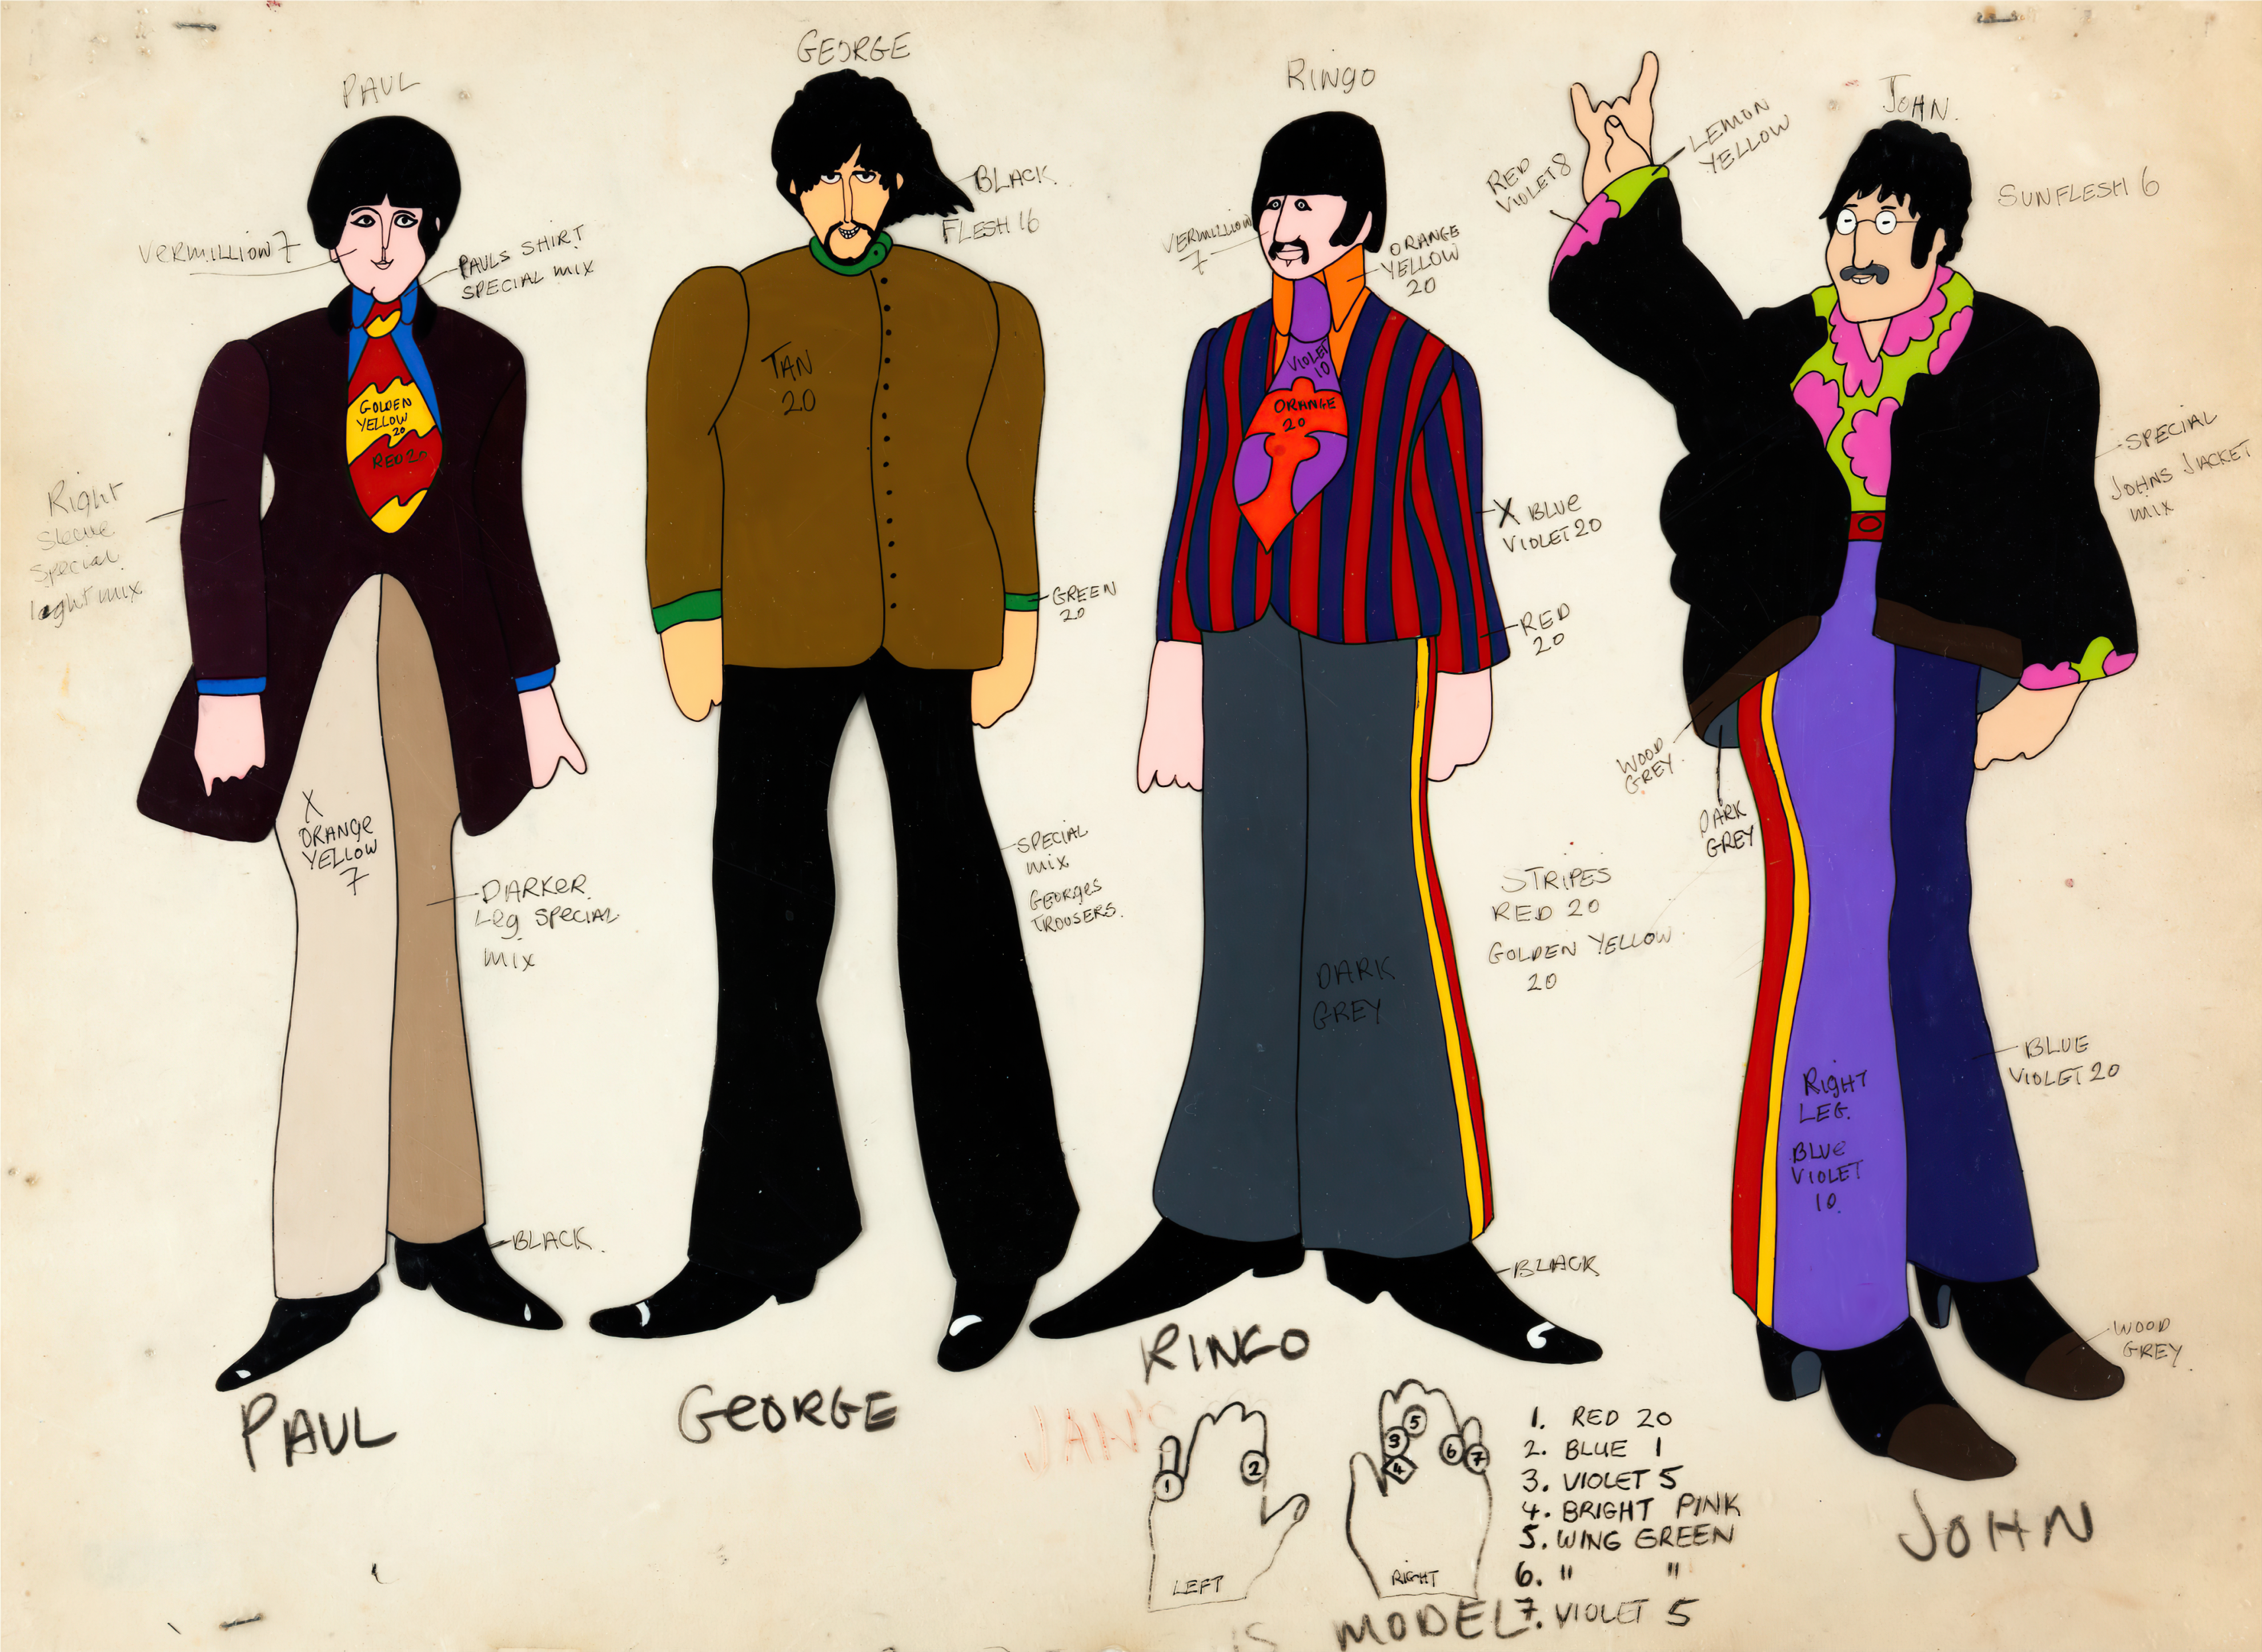 Color model sheet for yellow submarine rbeatles